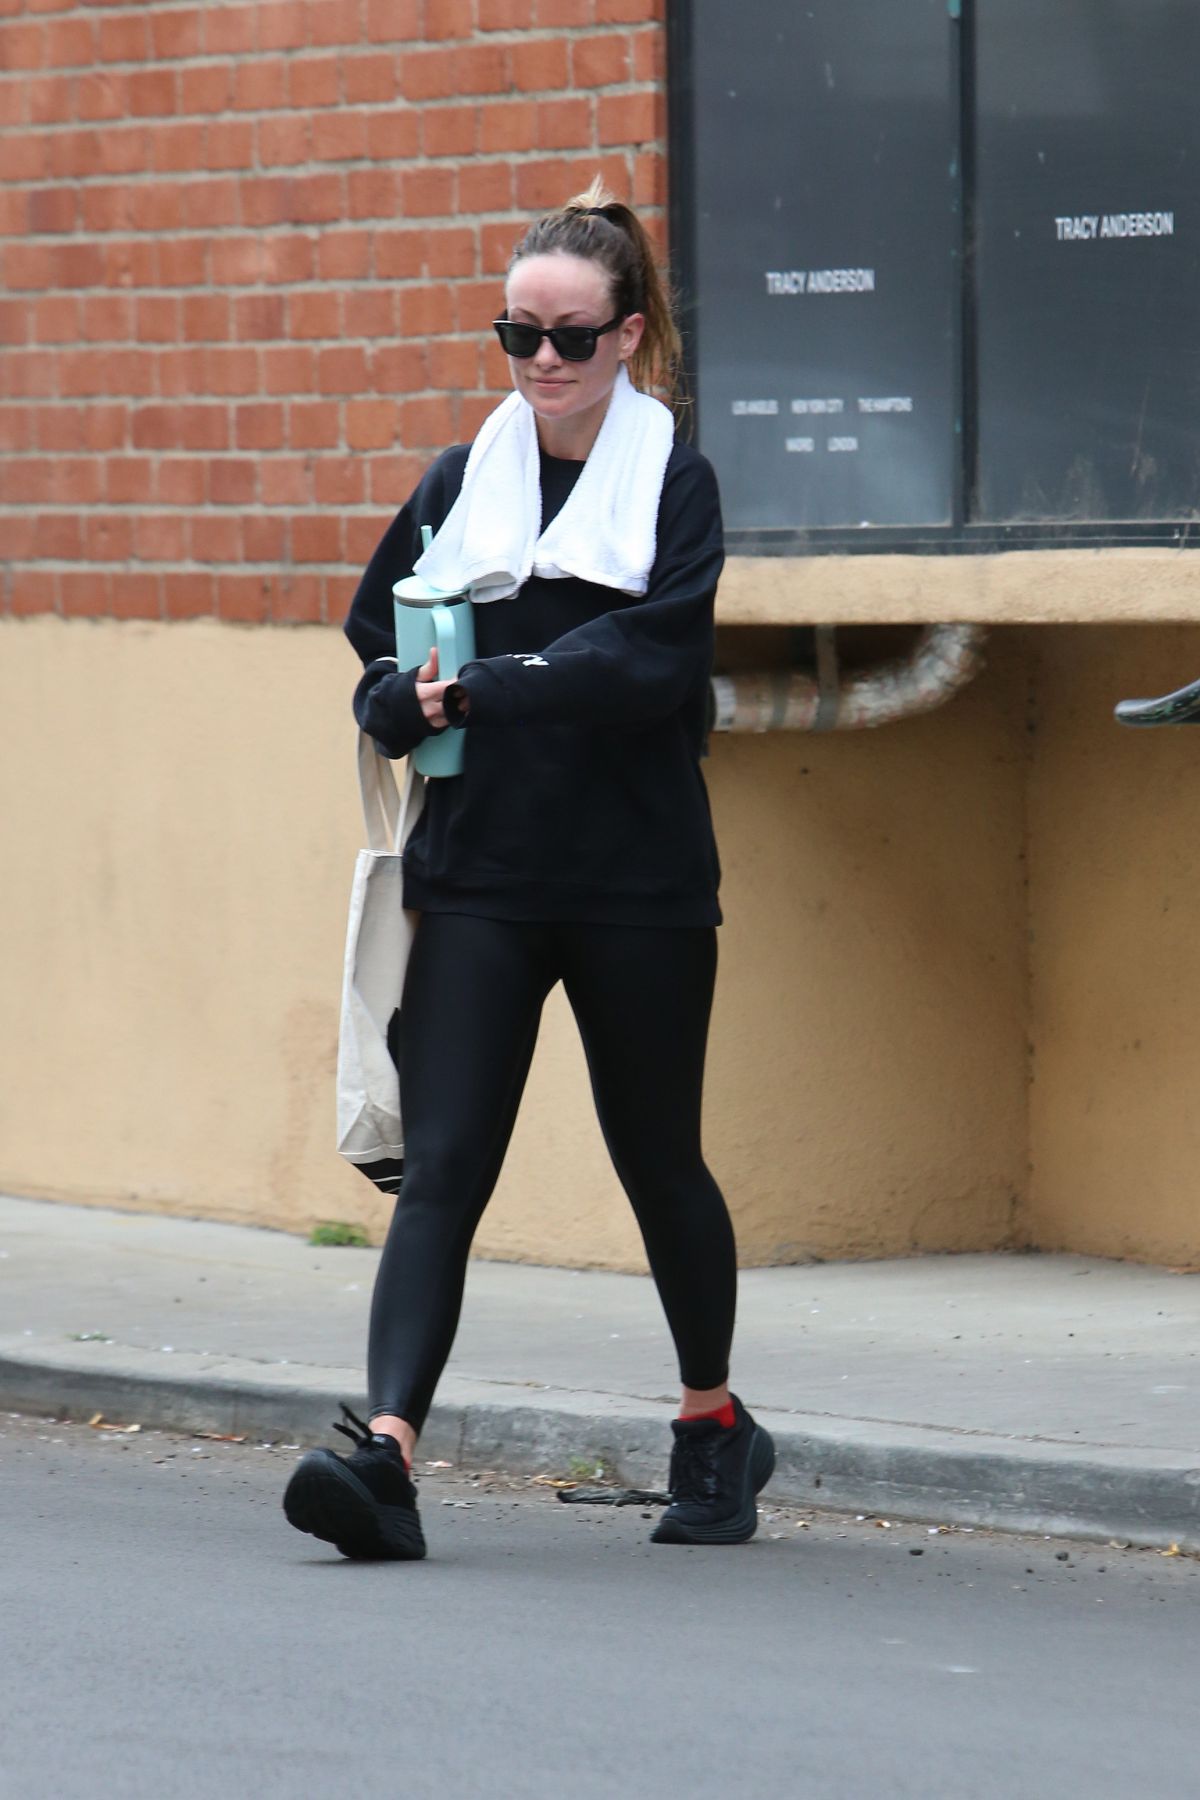 Olivia Wilde in Black Track Suit Exiting Tracy Anderson Gym LA 5